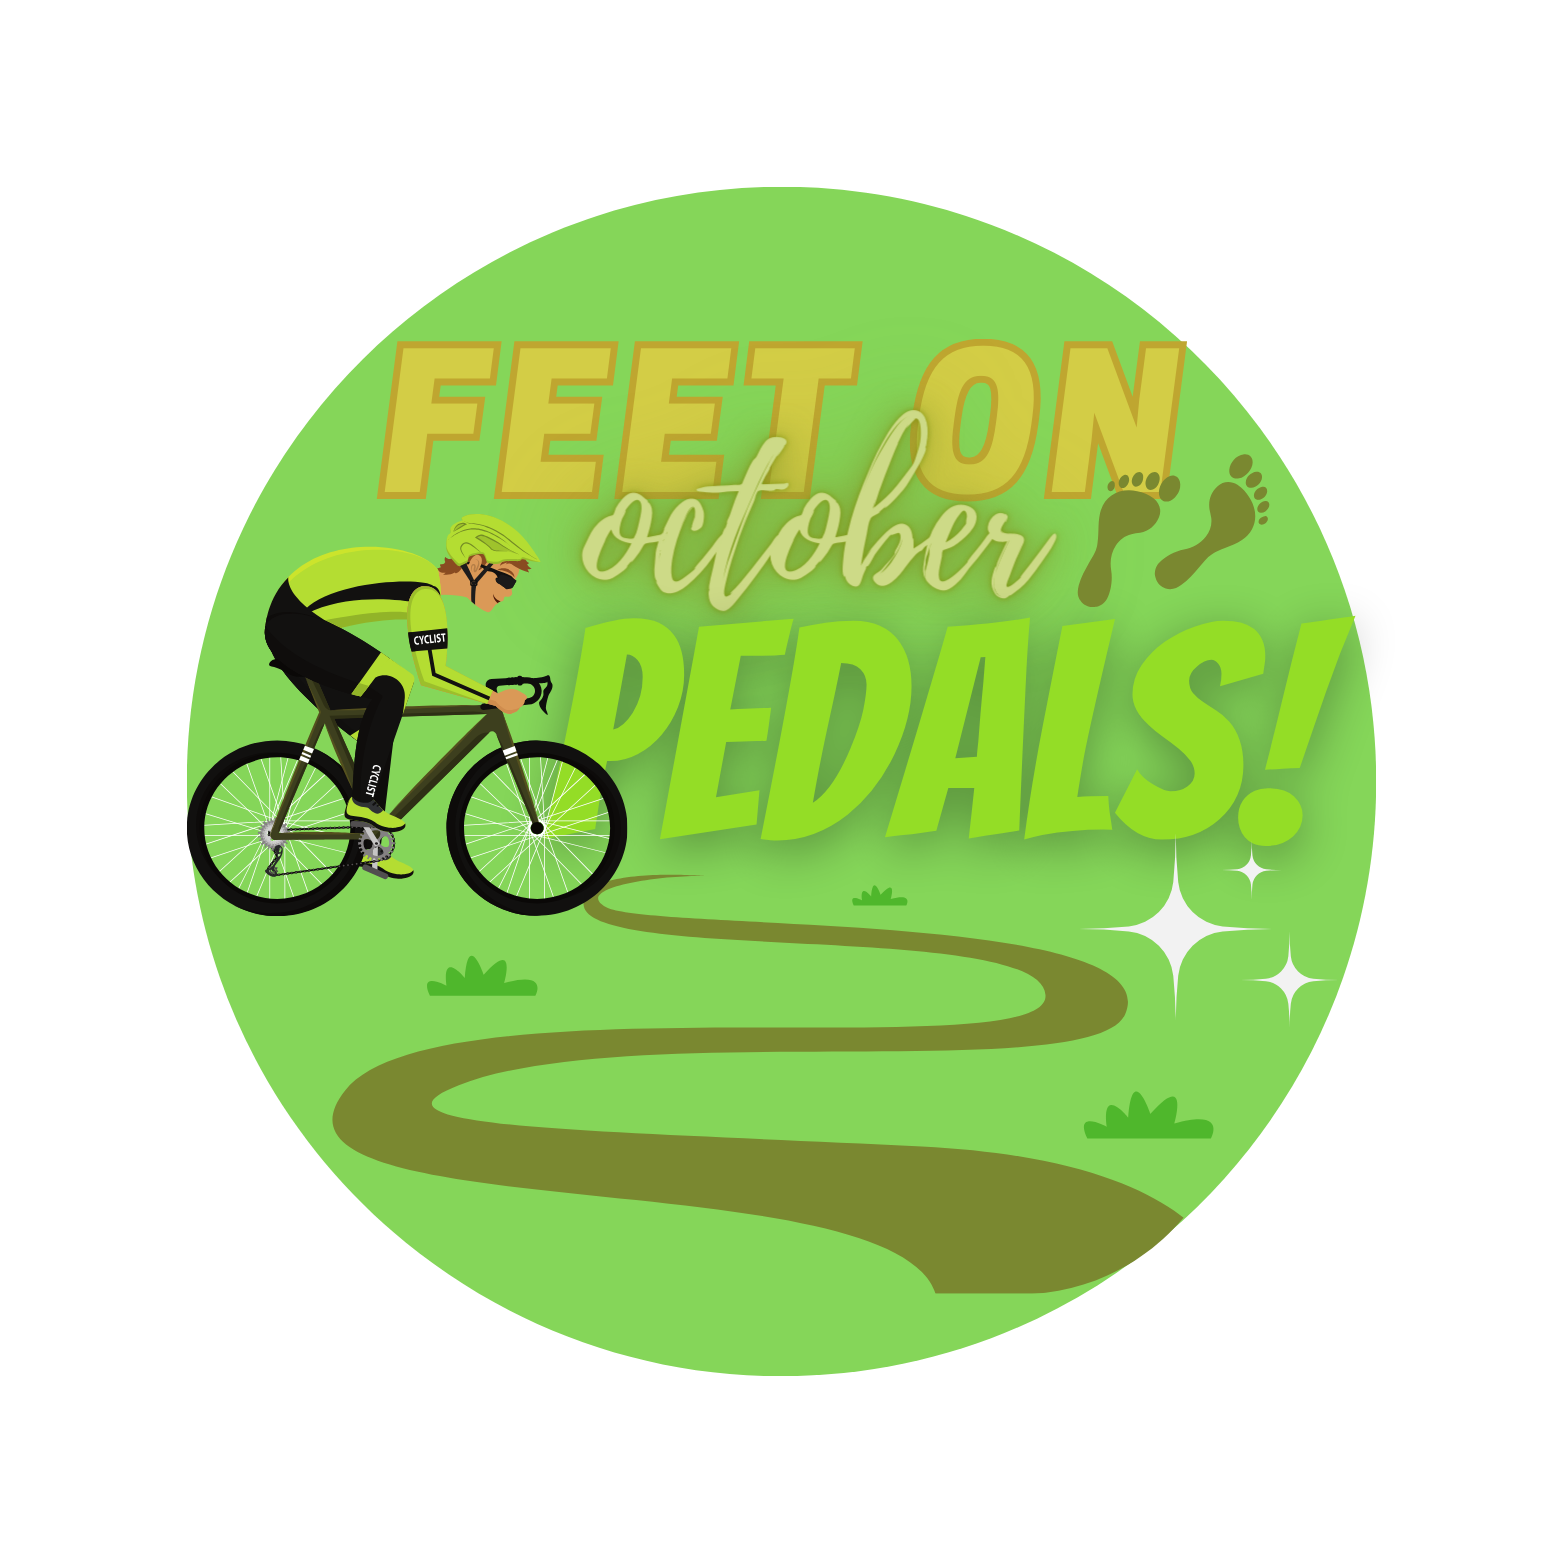 Feet on pedals in October